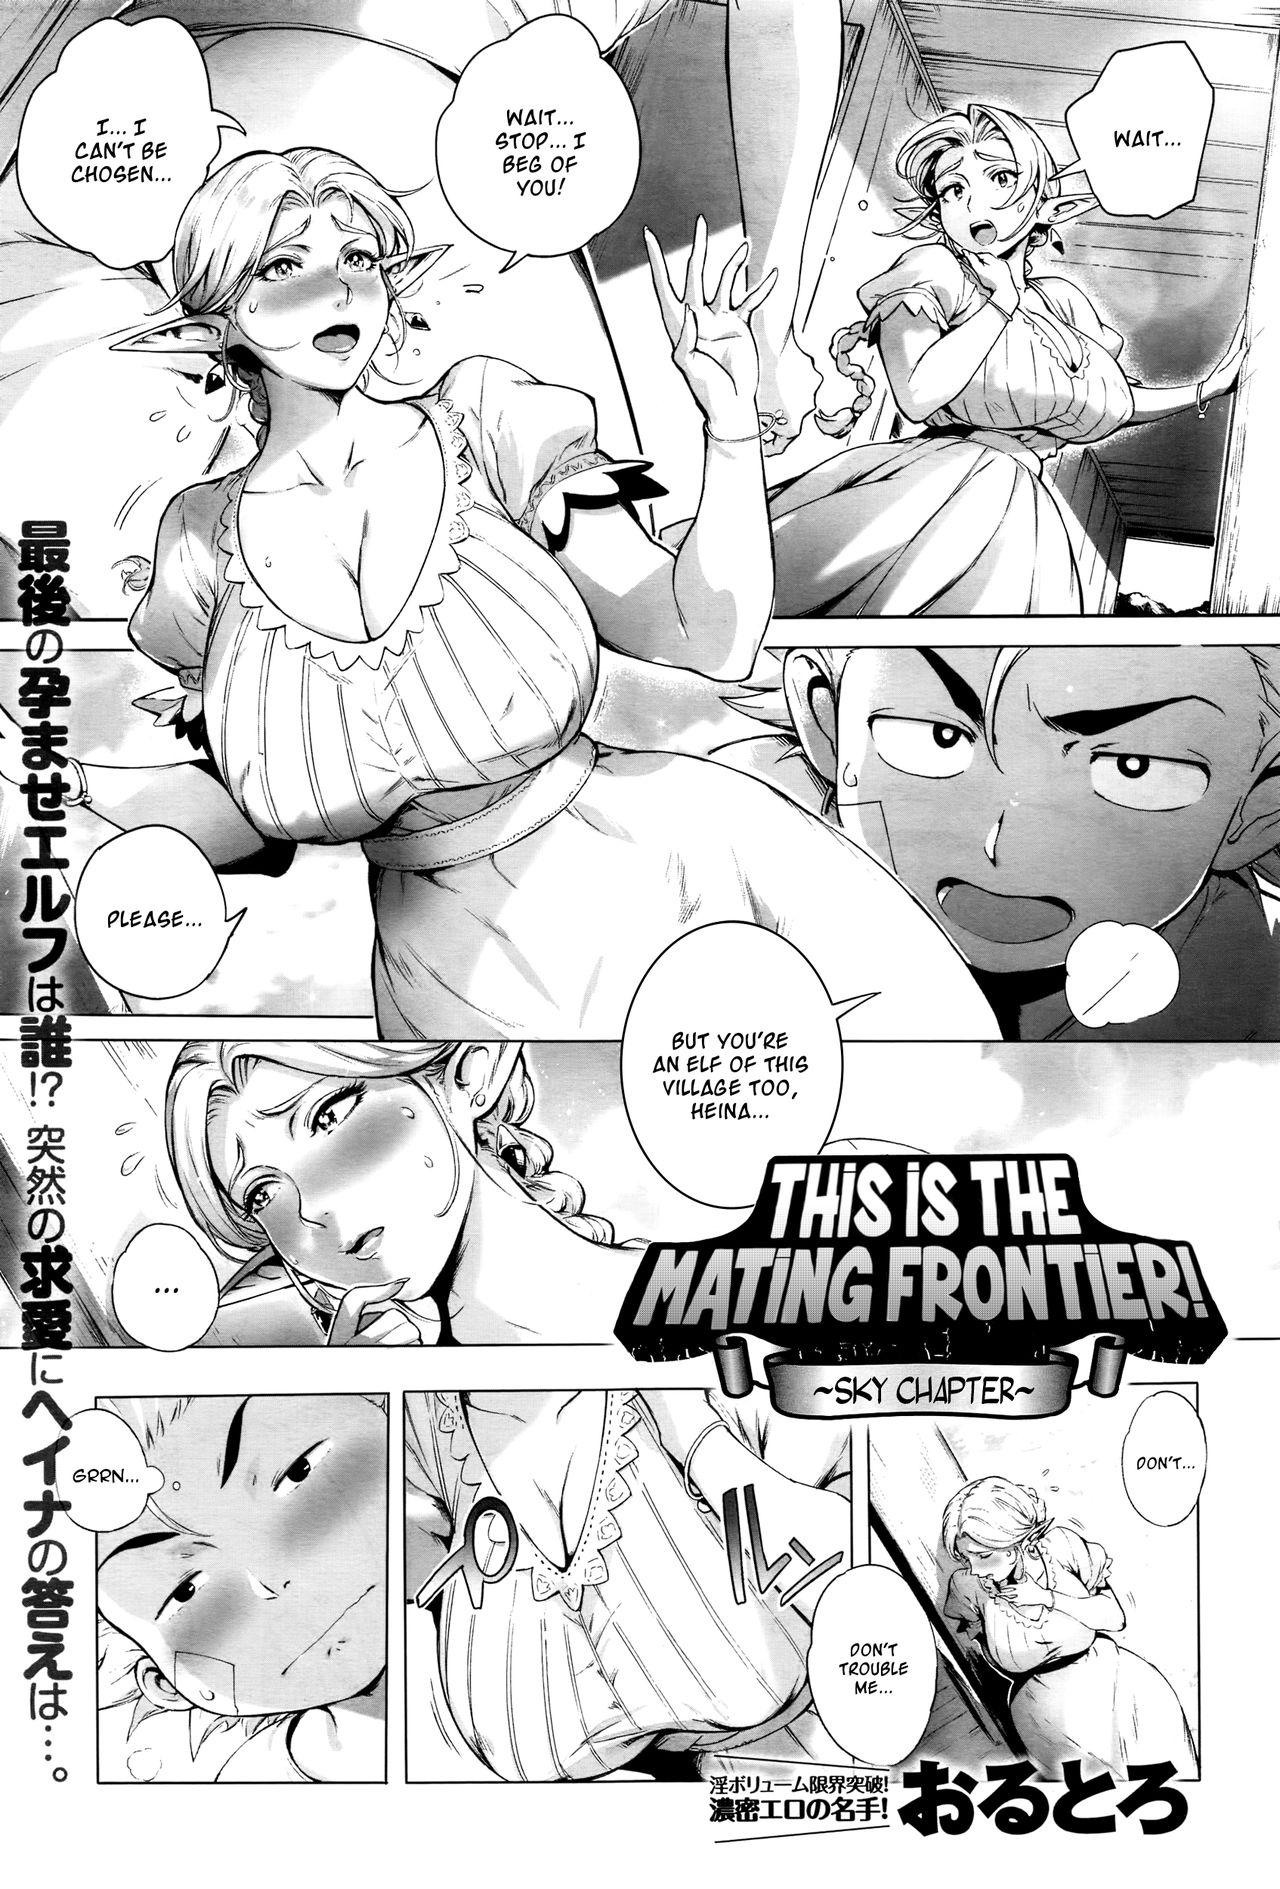 Koko ga Tanetsuke Frontier | This Is The Mating Frontier! Ch. 1-2 36